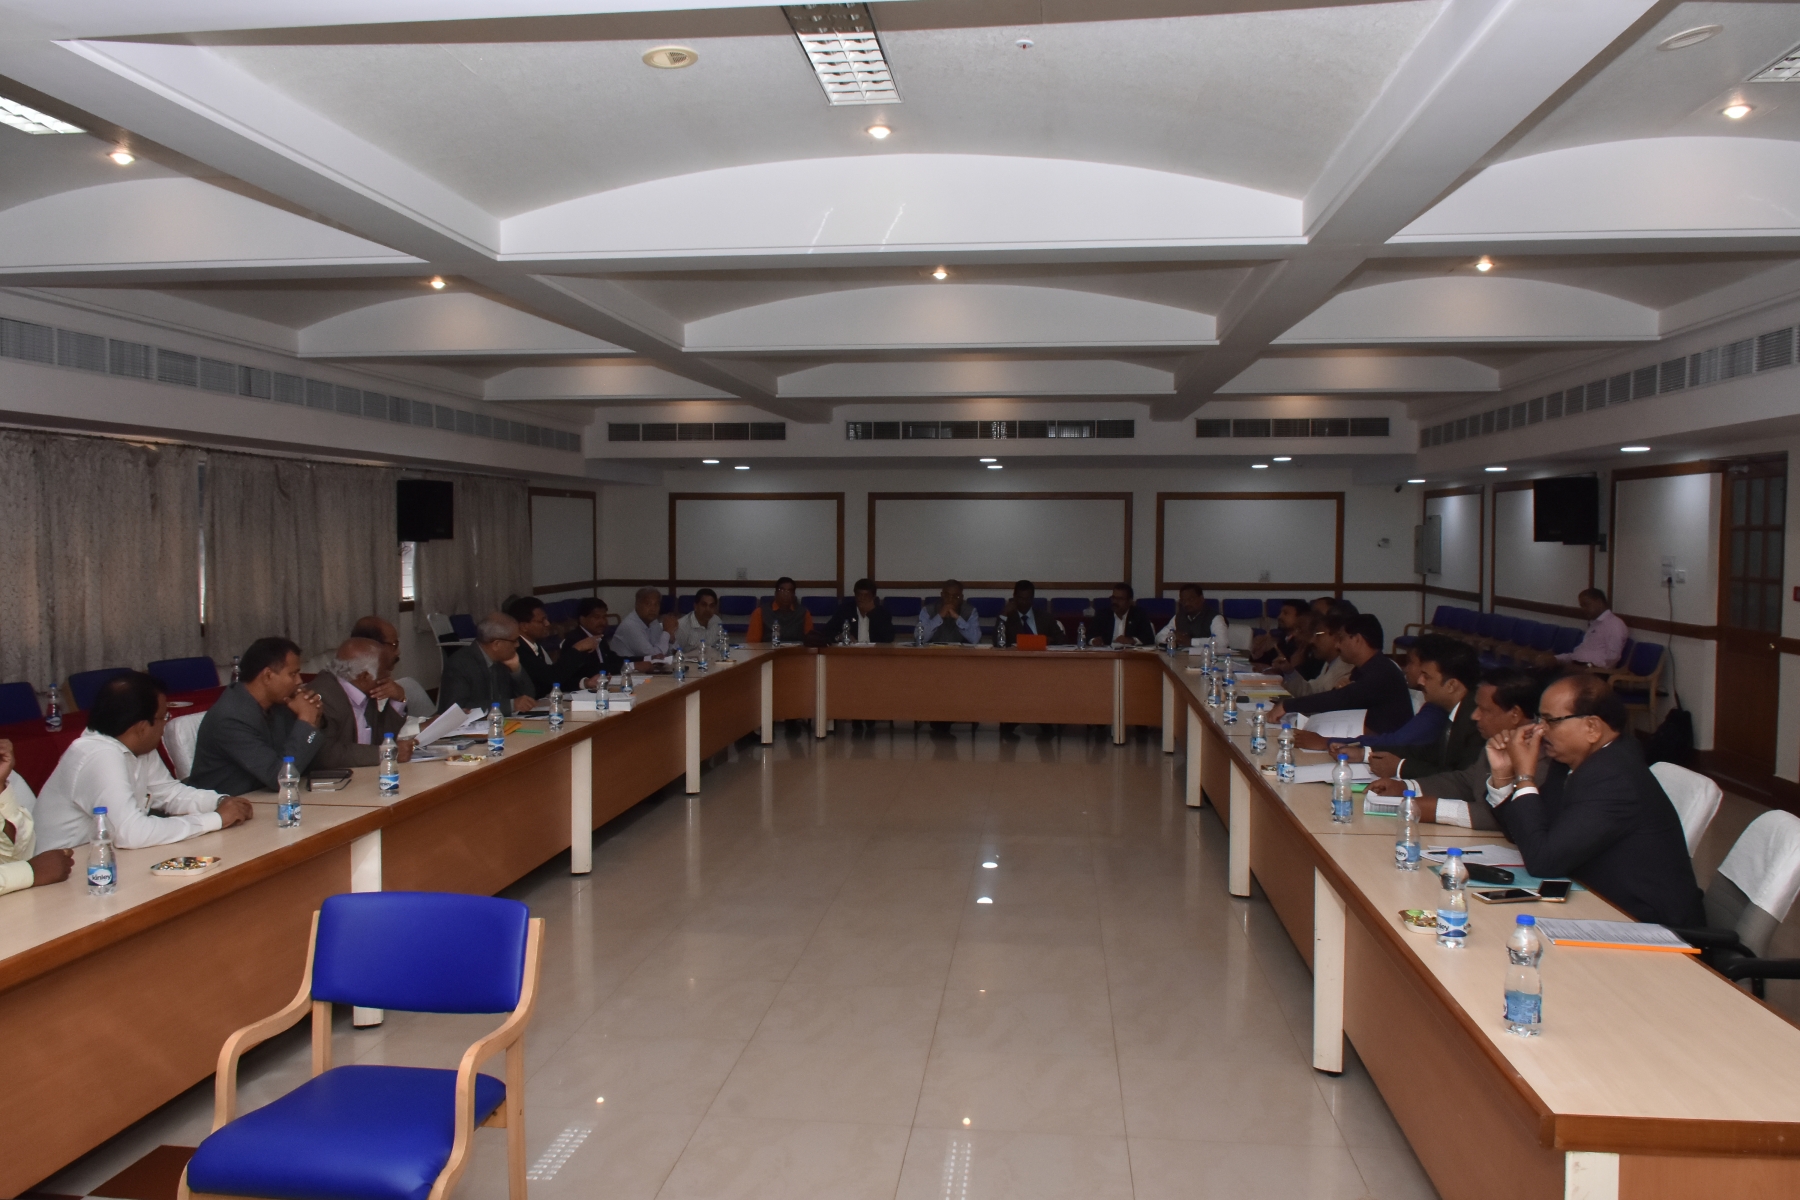 343rd Meeting Of The National Council On 10th February 2019 At Bangalore